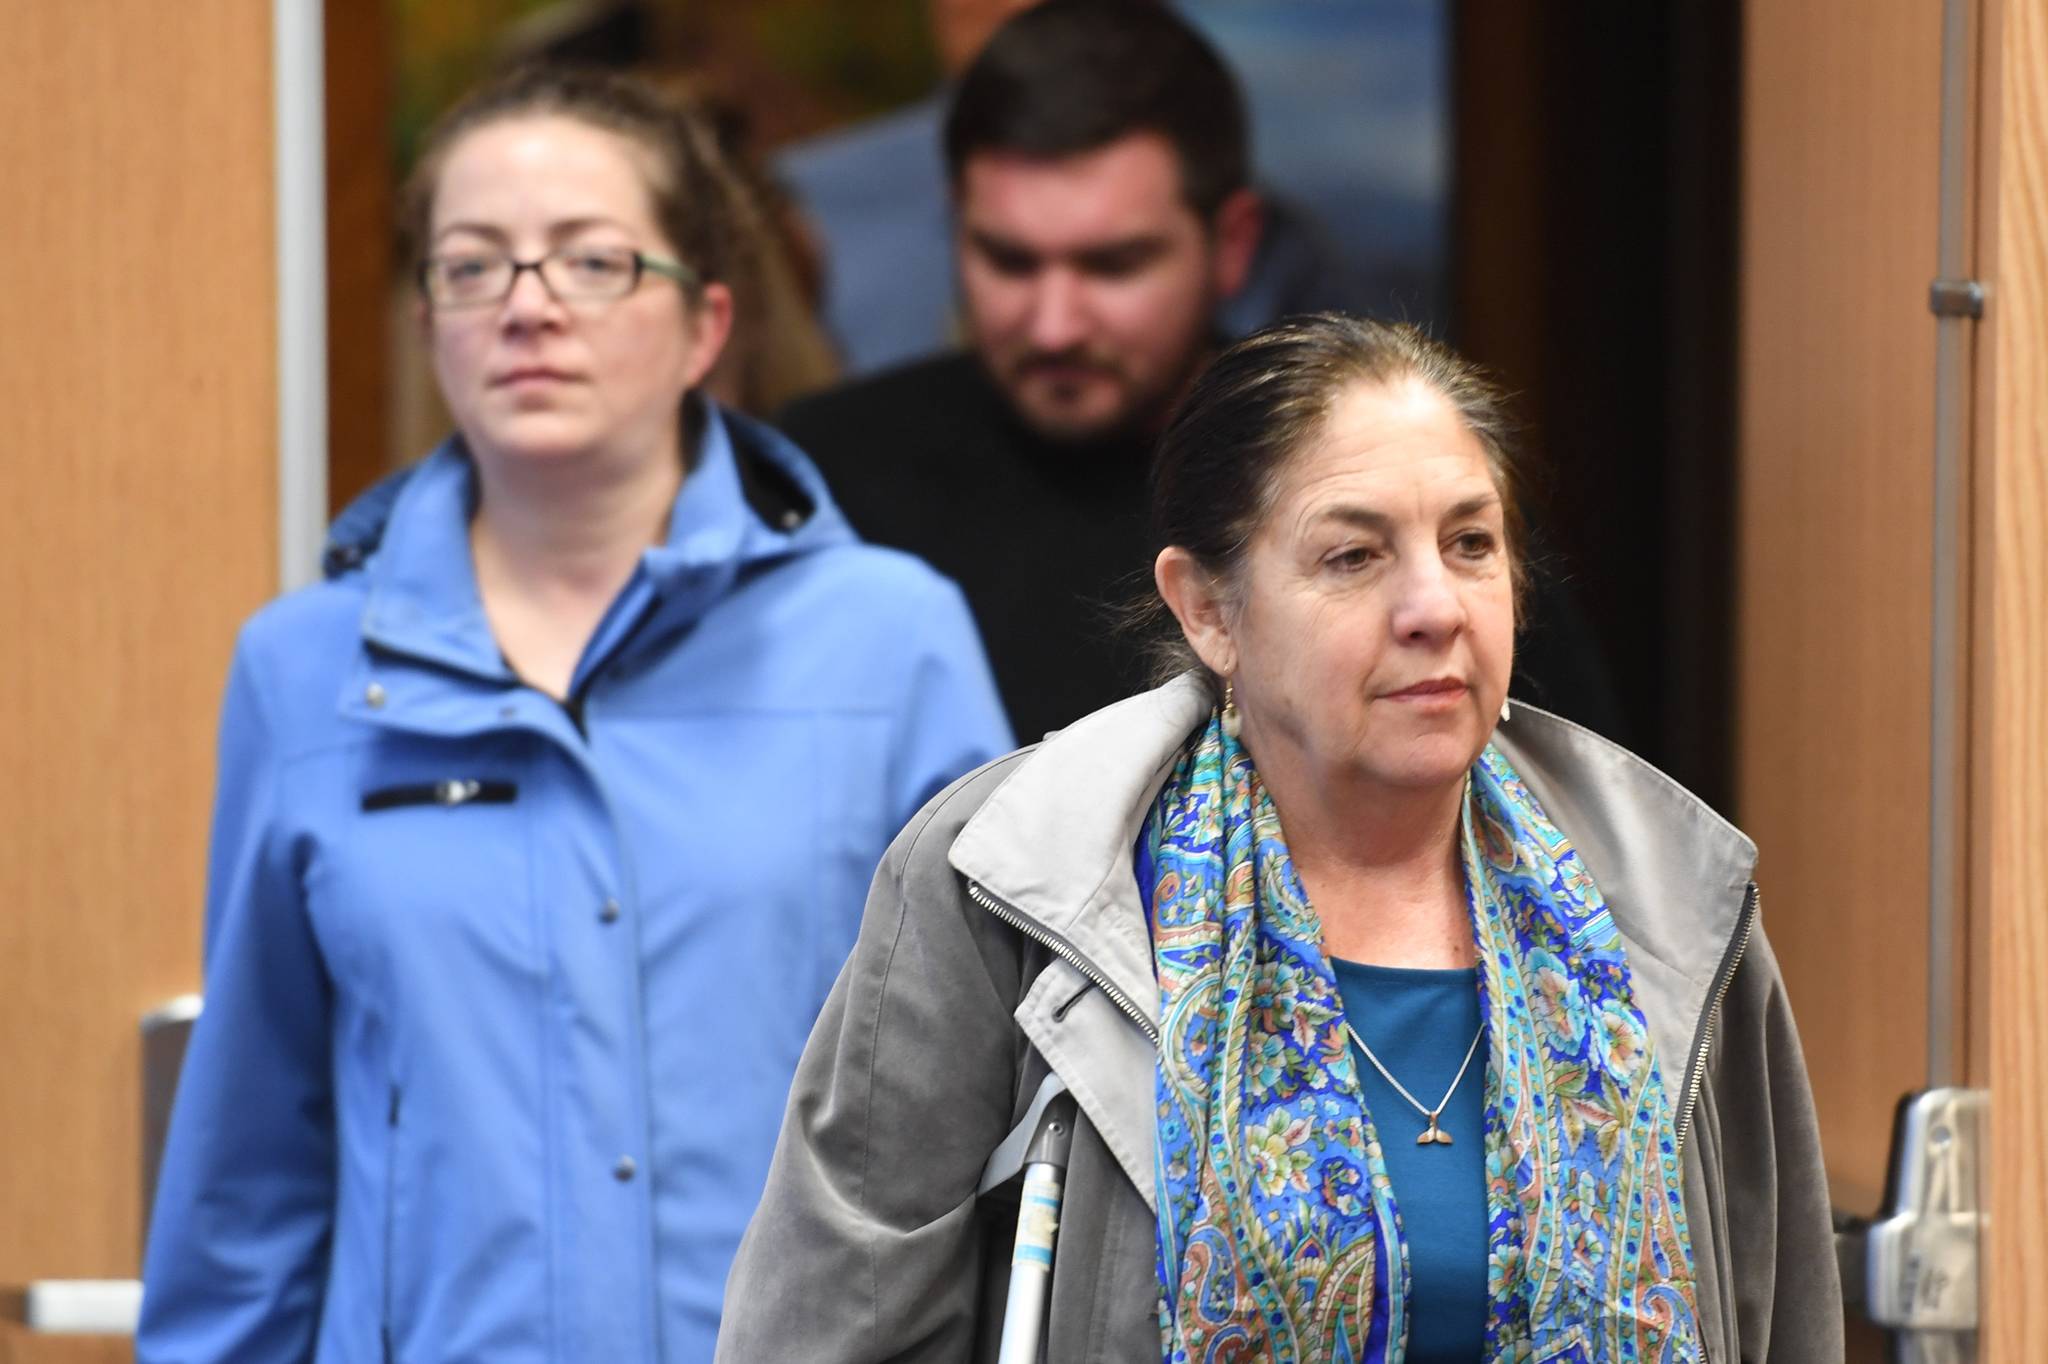 Loretto Lee Jones, 65, right, walks out of Juneau Superior Court on Friday, Nov. 1, 2019, with her attorney, Deborah Macaulay, of the Public Defender Agency, after a jury verdict of guilty in her trial on PFD felony theft and fraud. The two charges stem from allegations that Jones filed for her PFD payout in 2016 — $1,022 — while having resided outside the state for more than 180 days. (Michael Penn | Juneau Empire)